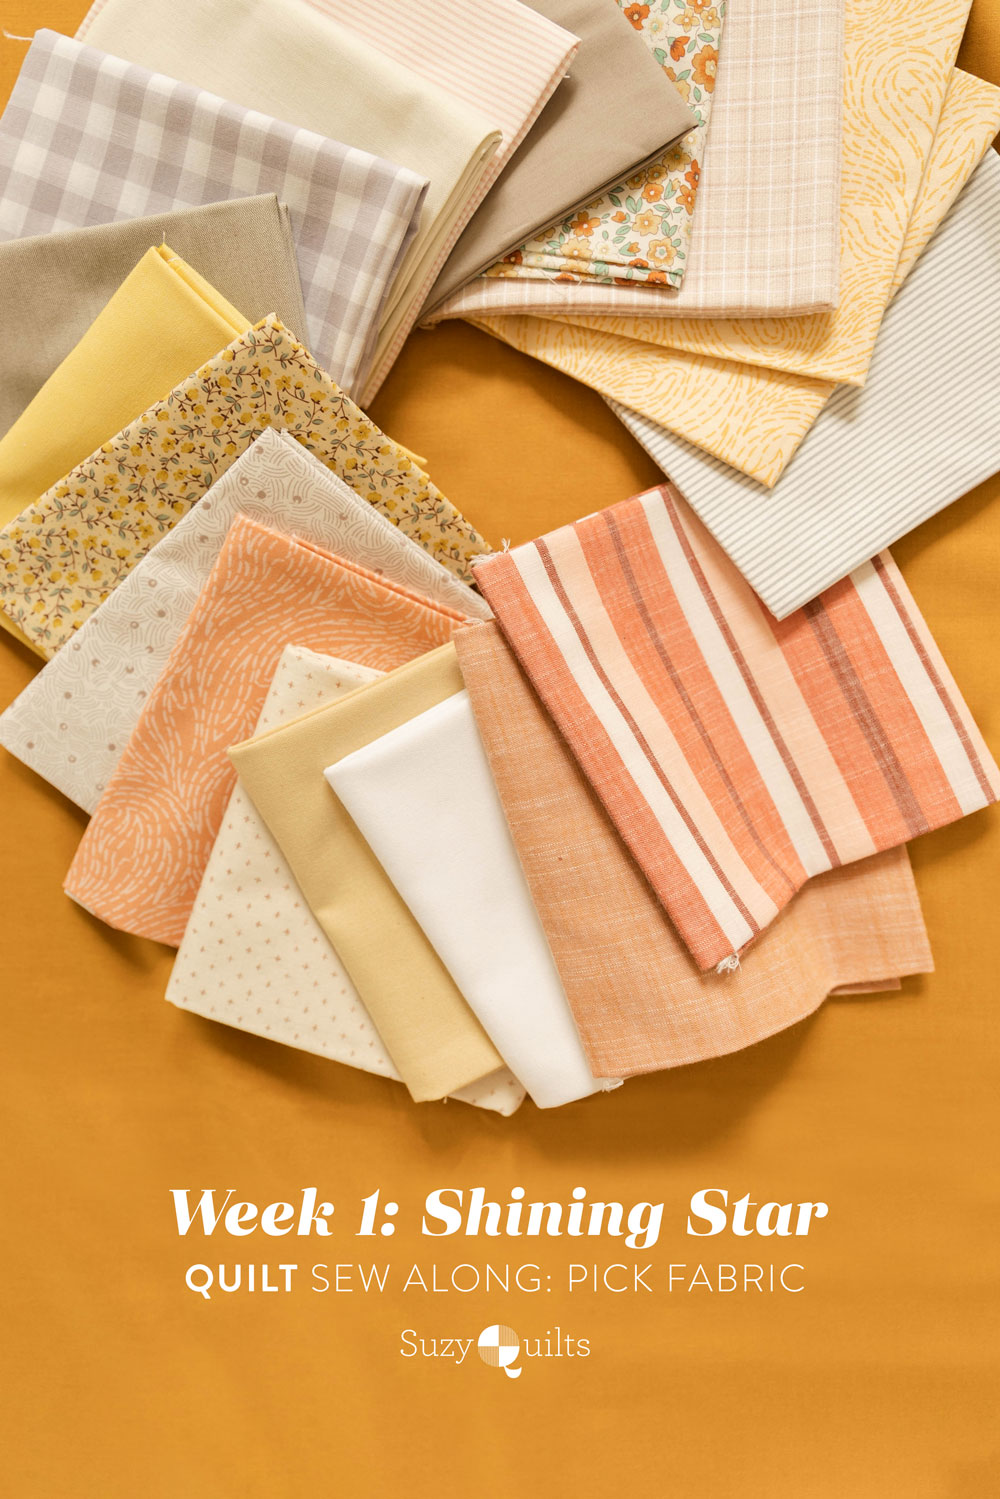 In week one of the Shining Star sew along we pick our fabric. Check out these tips for choosing color, value and scale of prints.